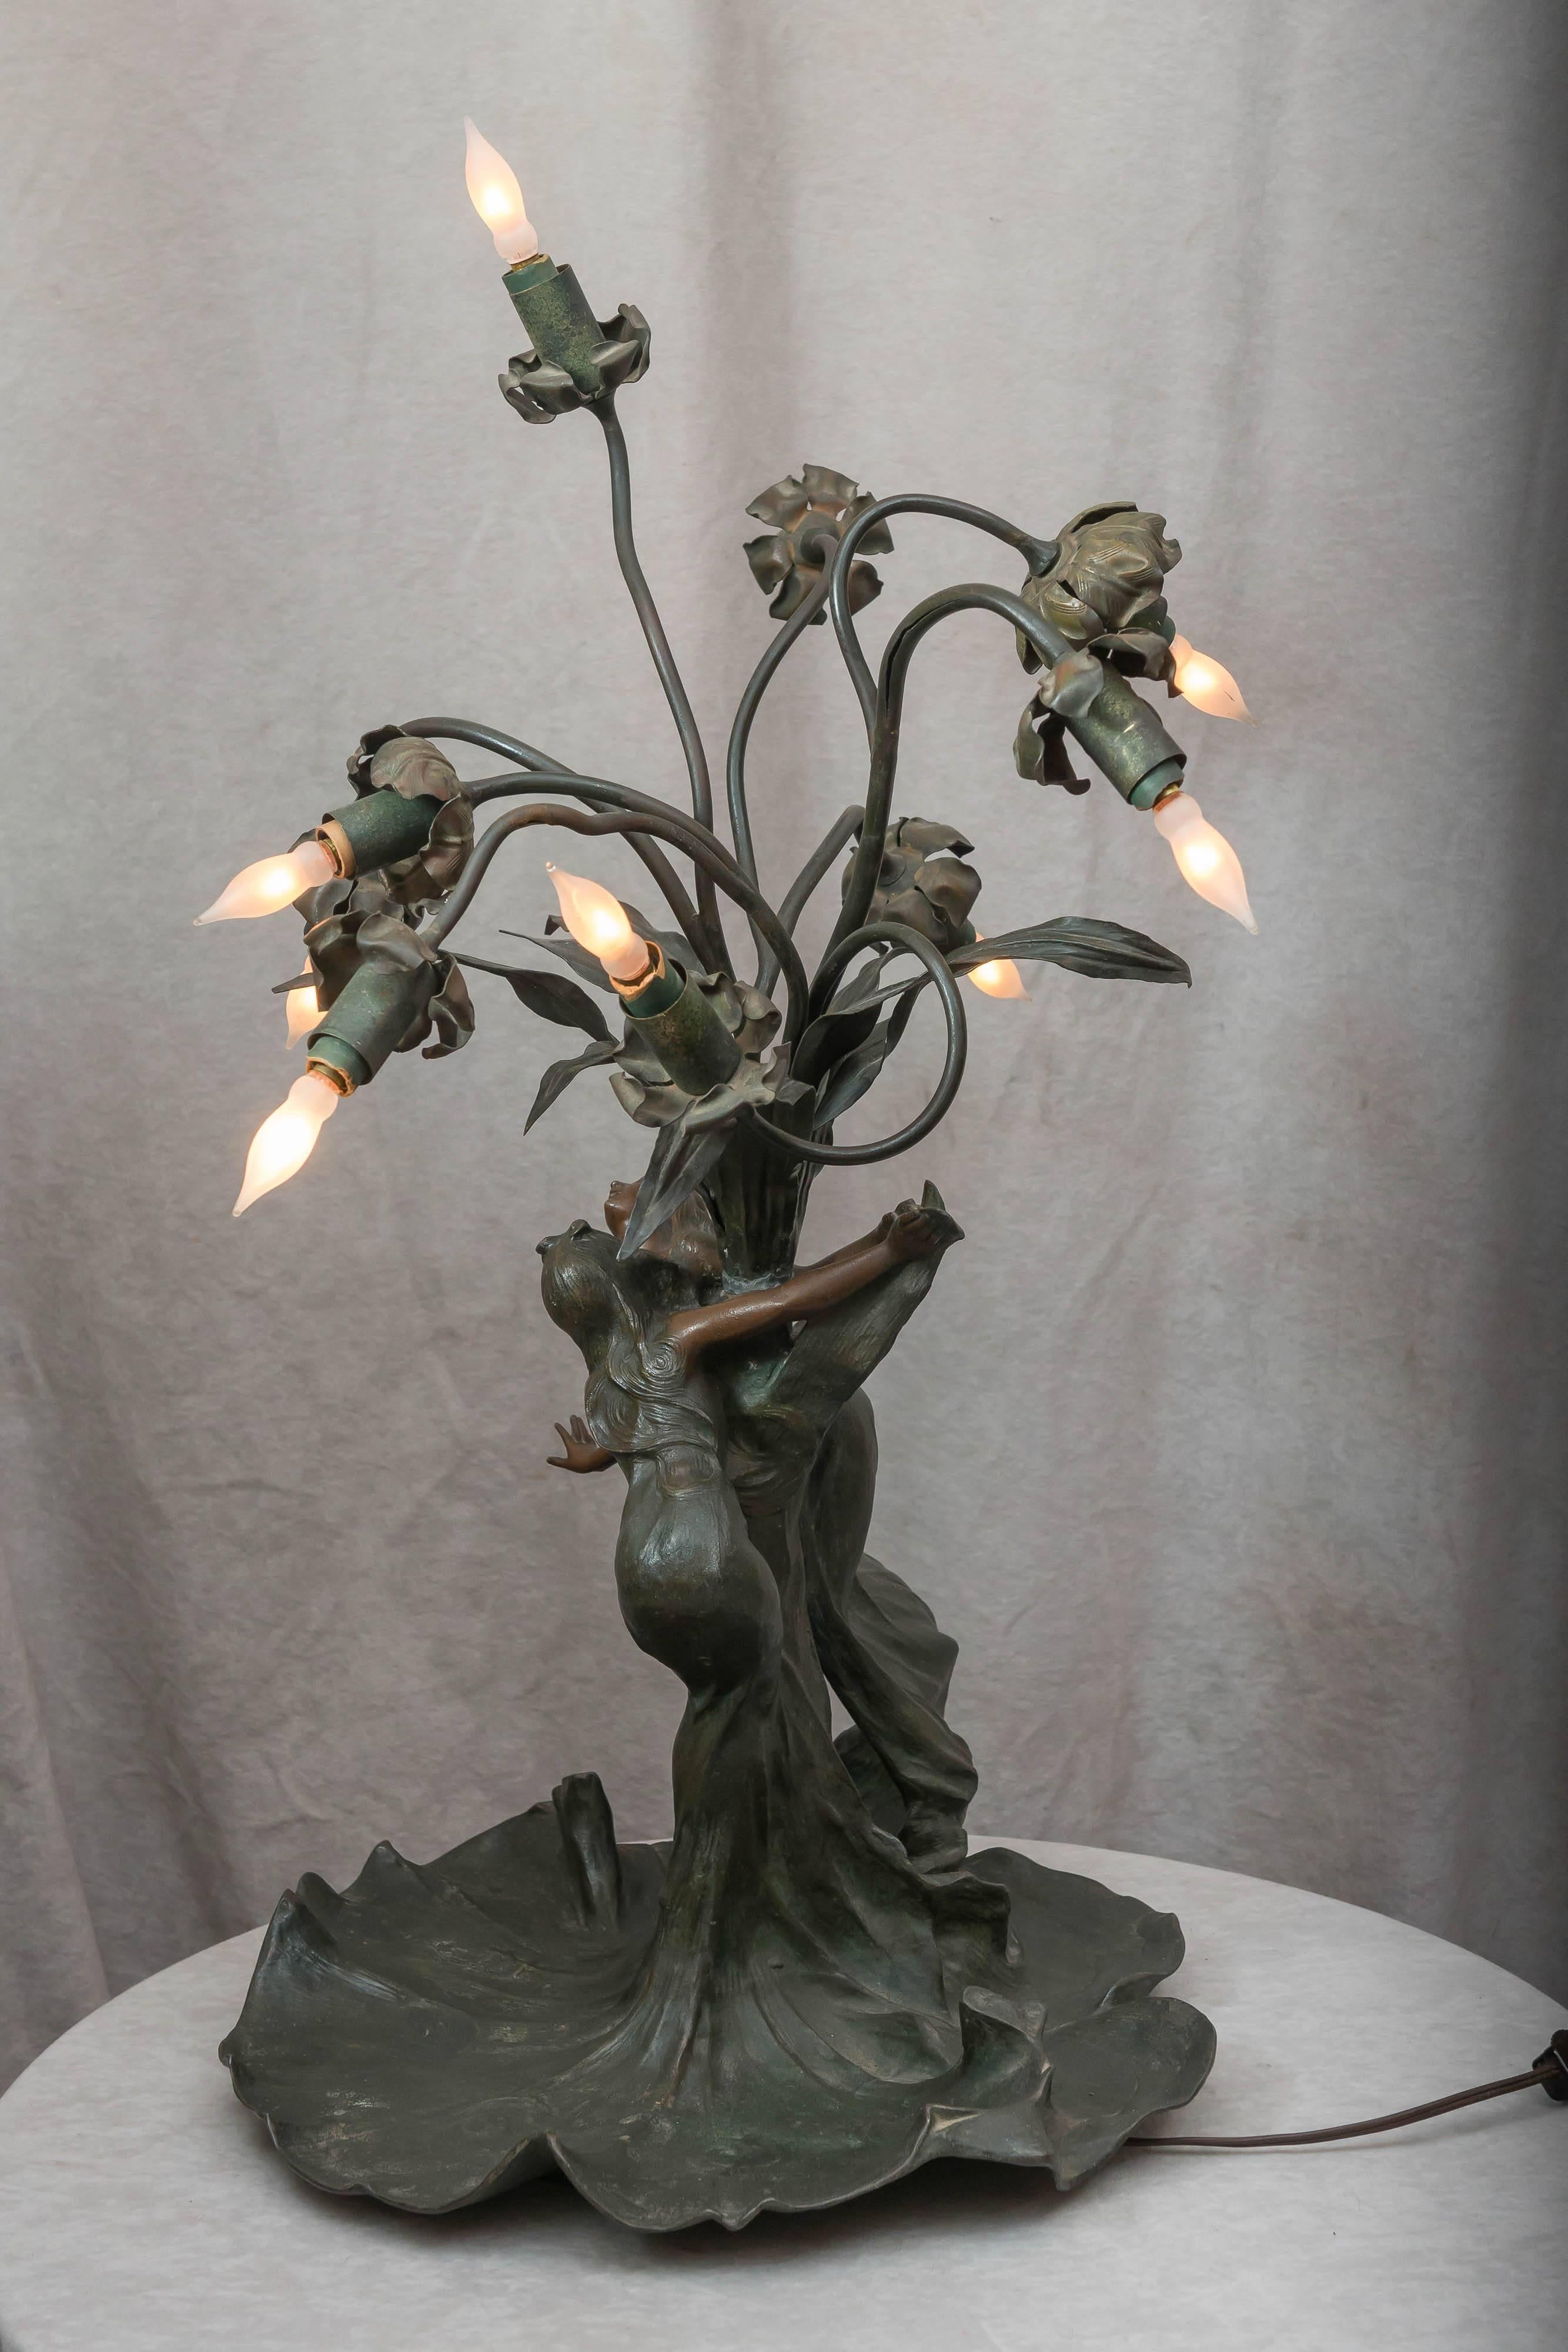 Spelter French Art Nouveau Period Nine-Light Sculptural Table Lamp, ca. 1900 Signed Sola